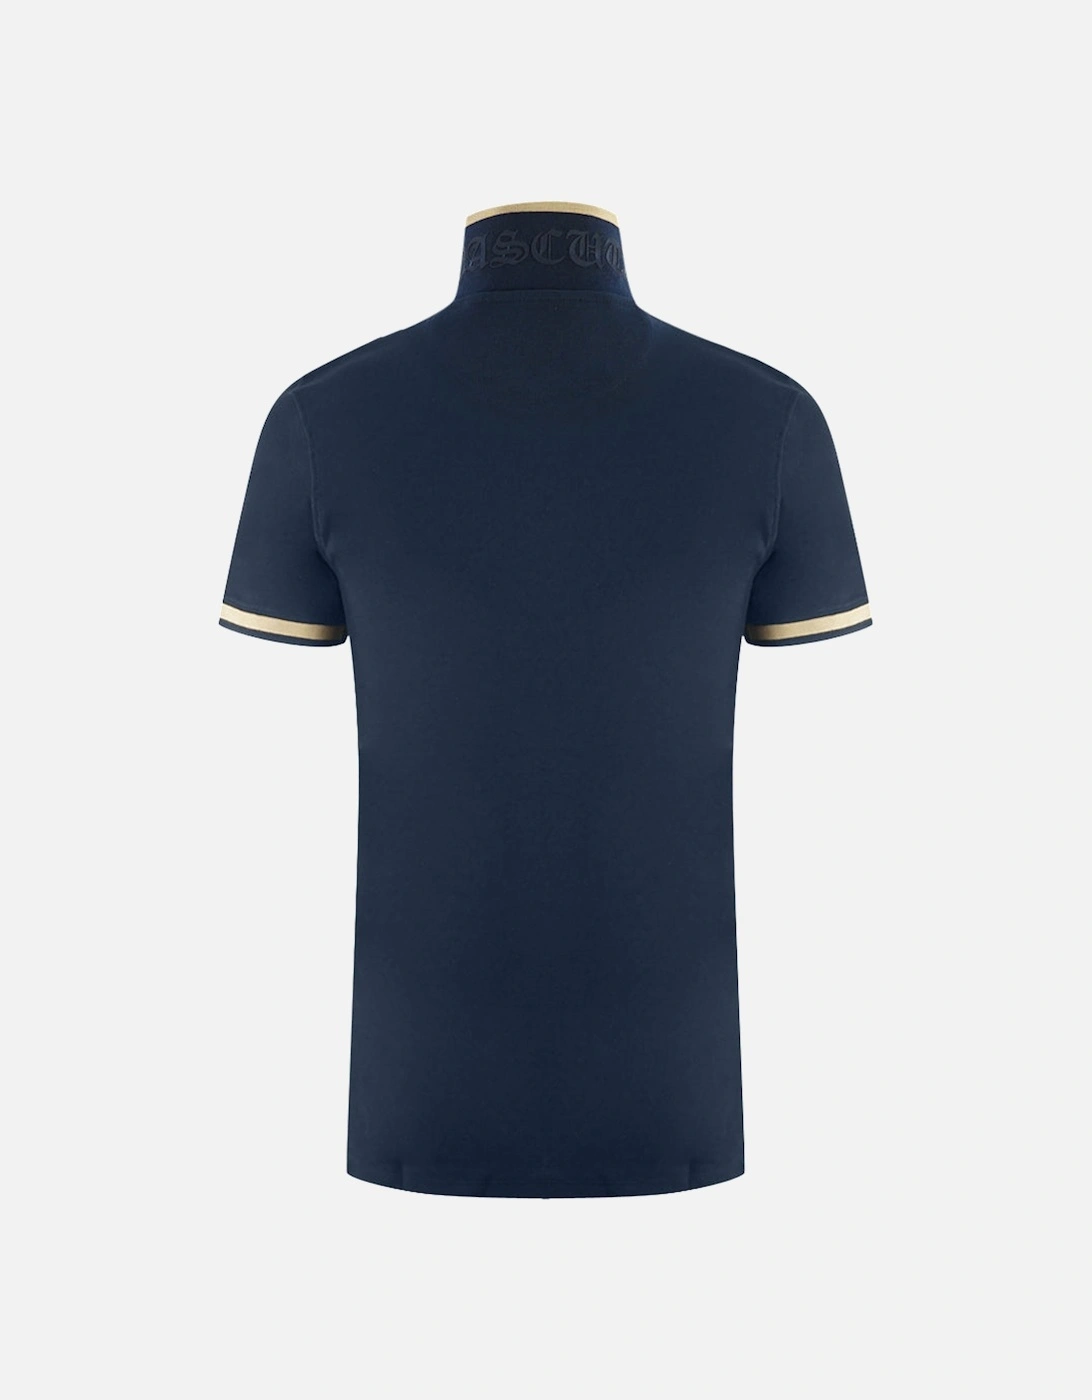 AQ 1851 Embroidered Tipped Navy Blue Polo Shirt